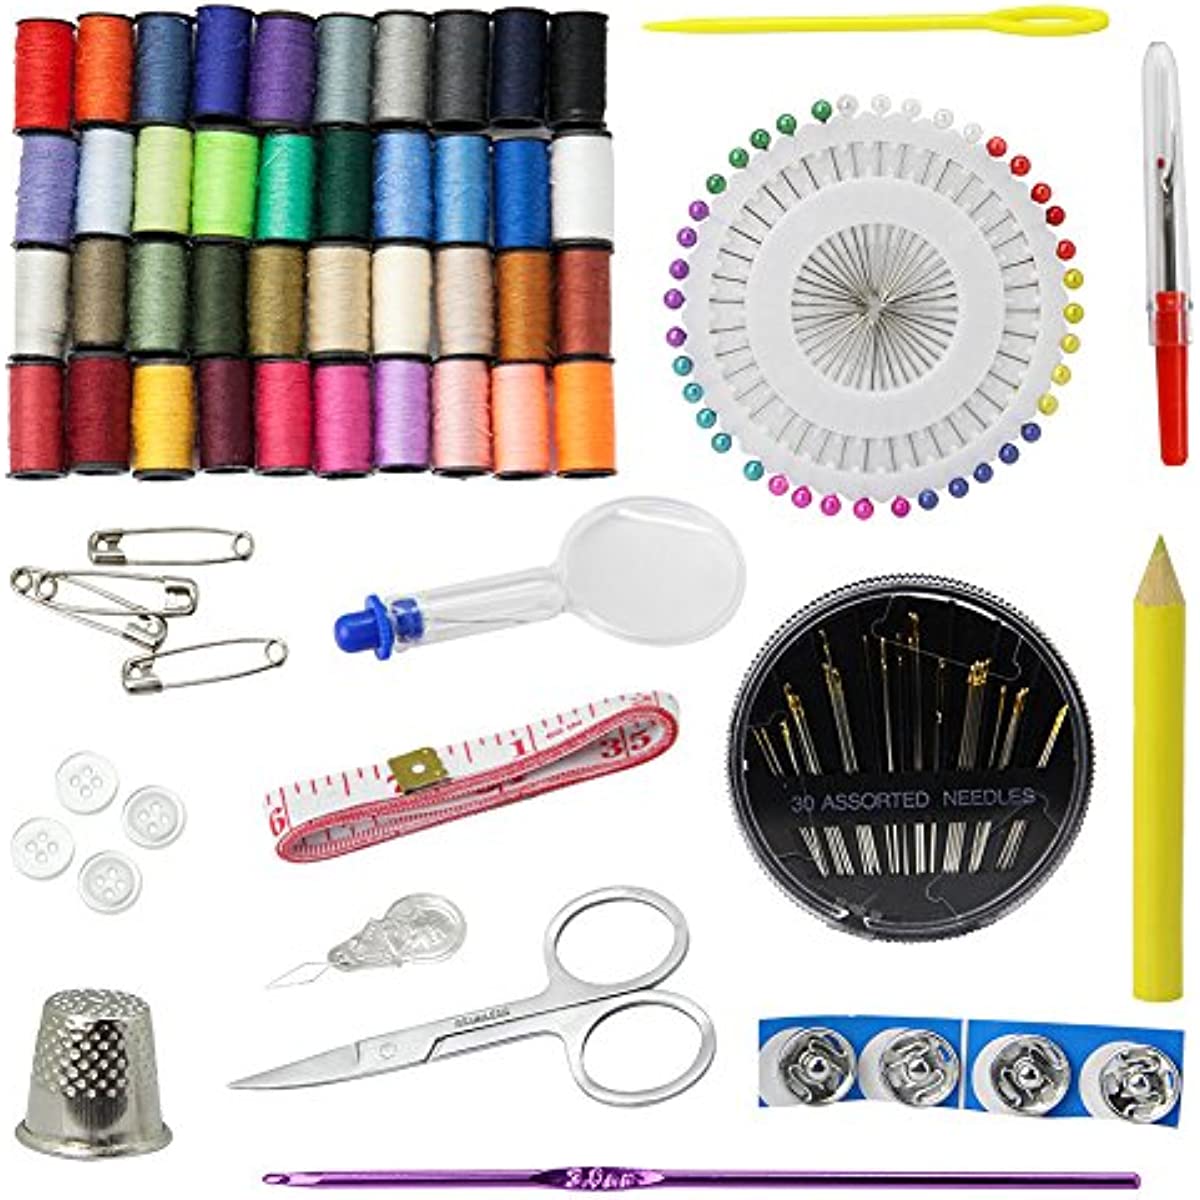 Sewing Kit Diy Premium Sewing Supplies Portable Mini Sew Kits For Traveler  Adults Beginner Emergency Filled With Mending Sewing Needles Scissors  Thimble Thread Tape Measure Set, Shop The Latest Trends